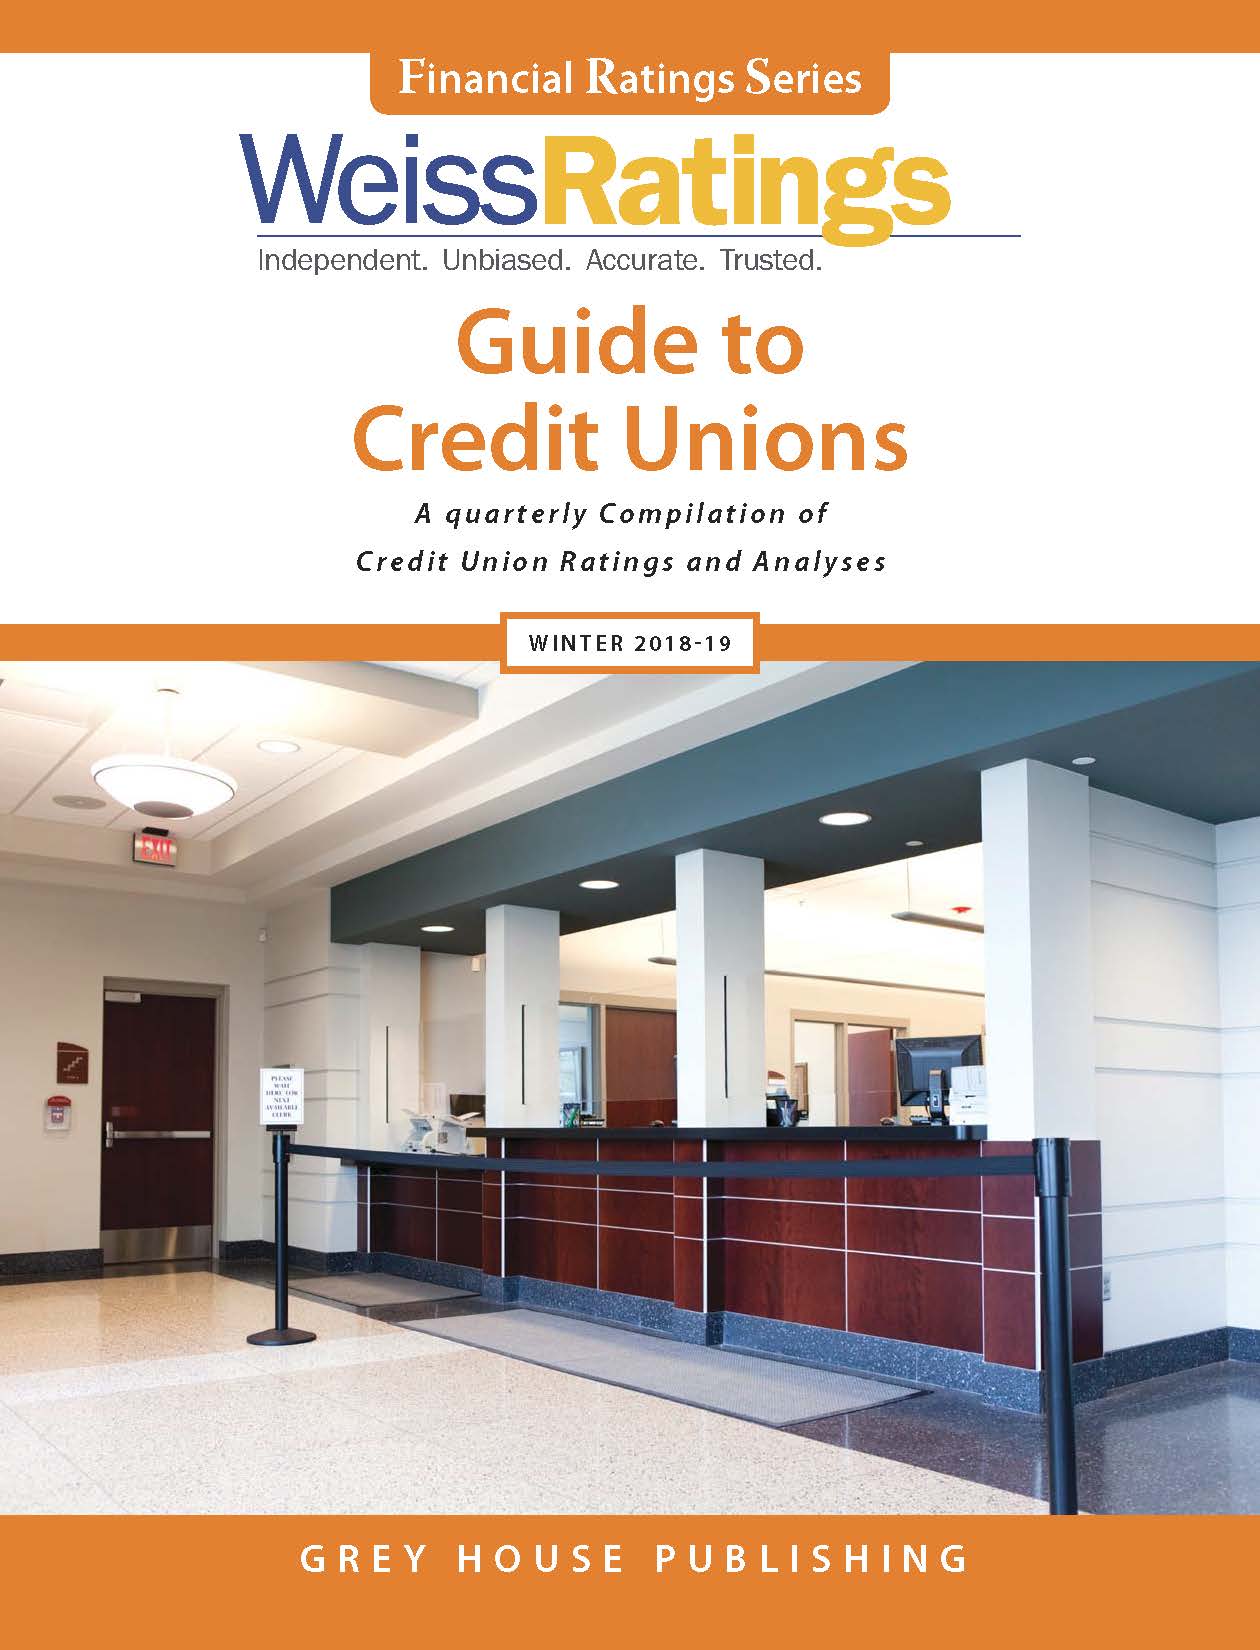 Weiss Ratings Guide to Credit Unions